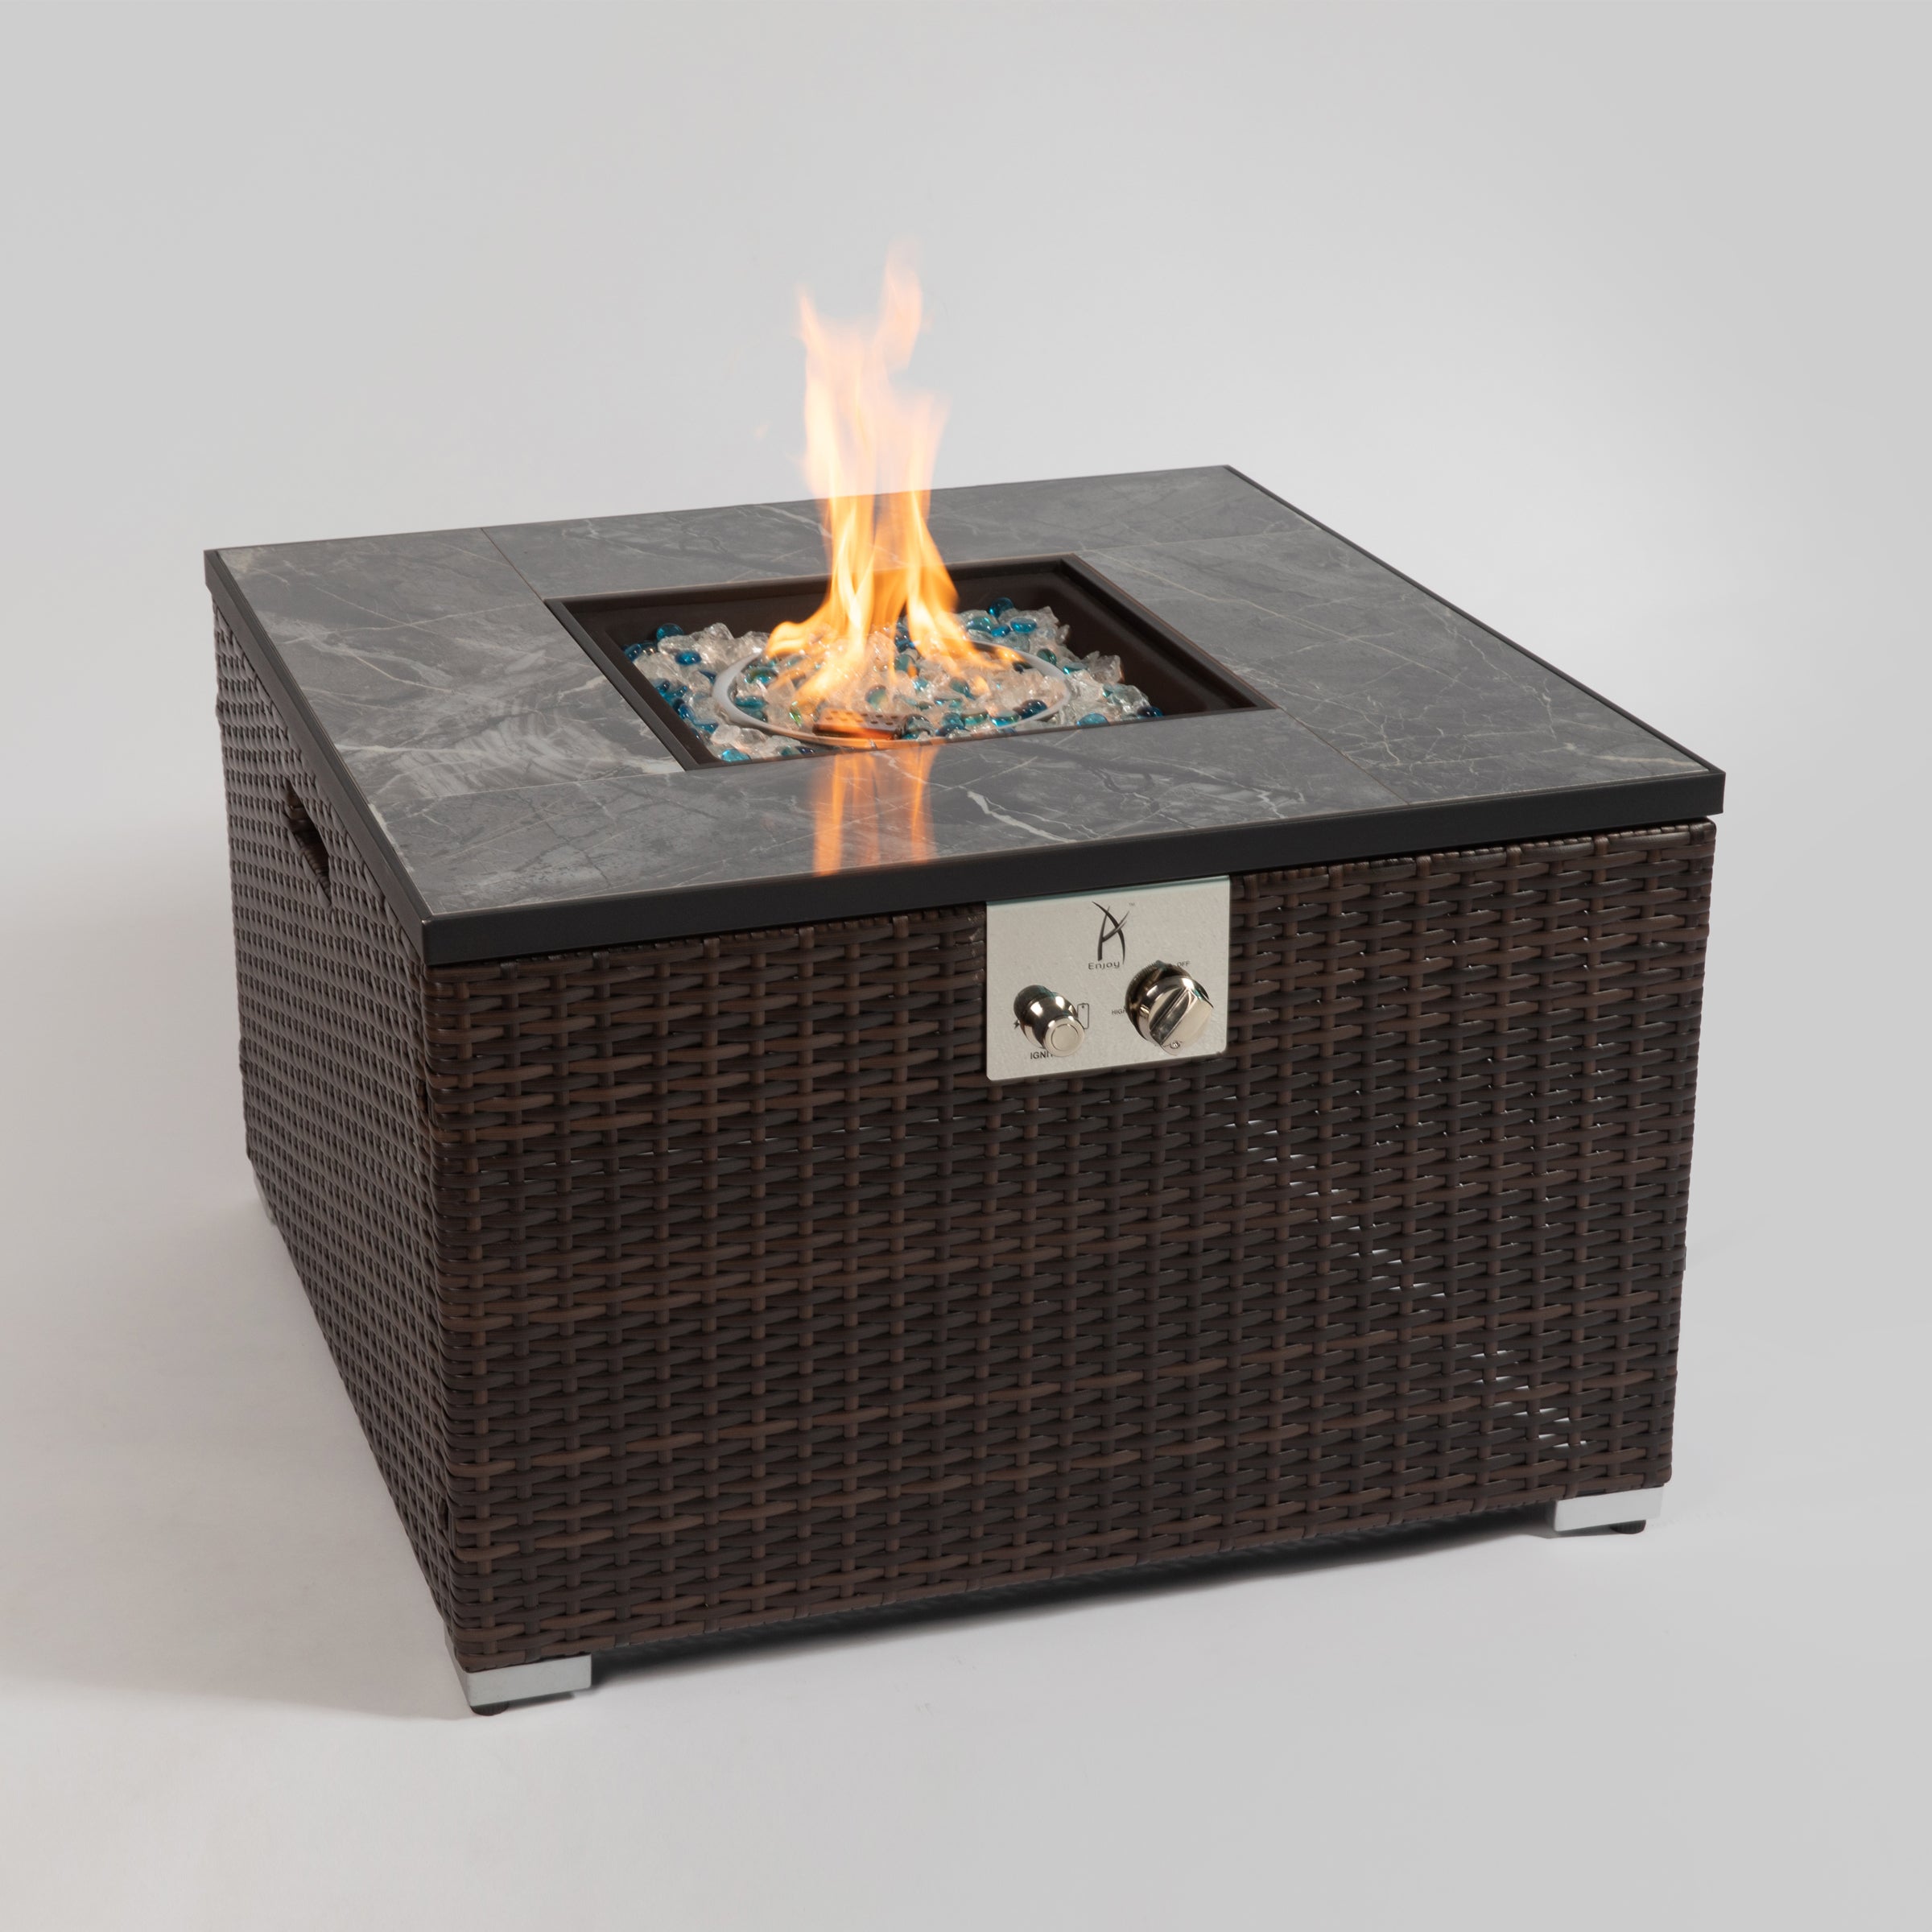 32" Square Propane Gas Fire Pit Table with Ceramic Tile Tabletop, 40000BTU Heat Output